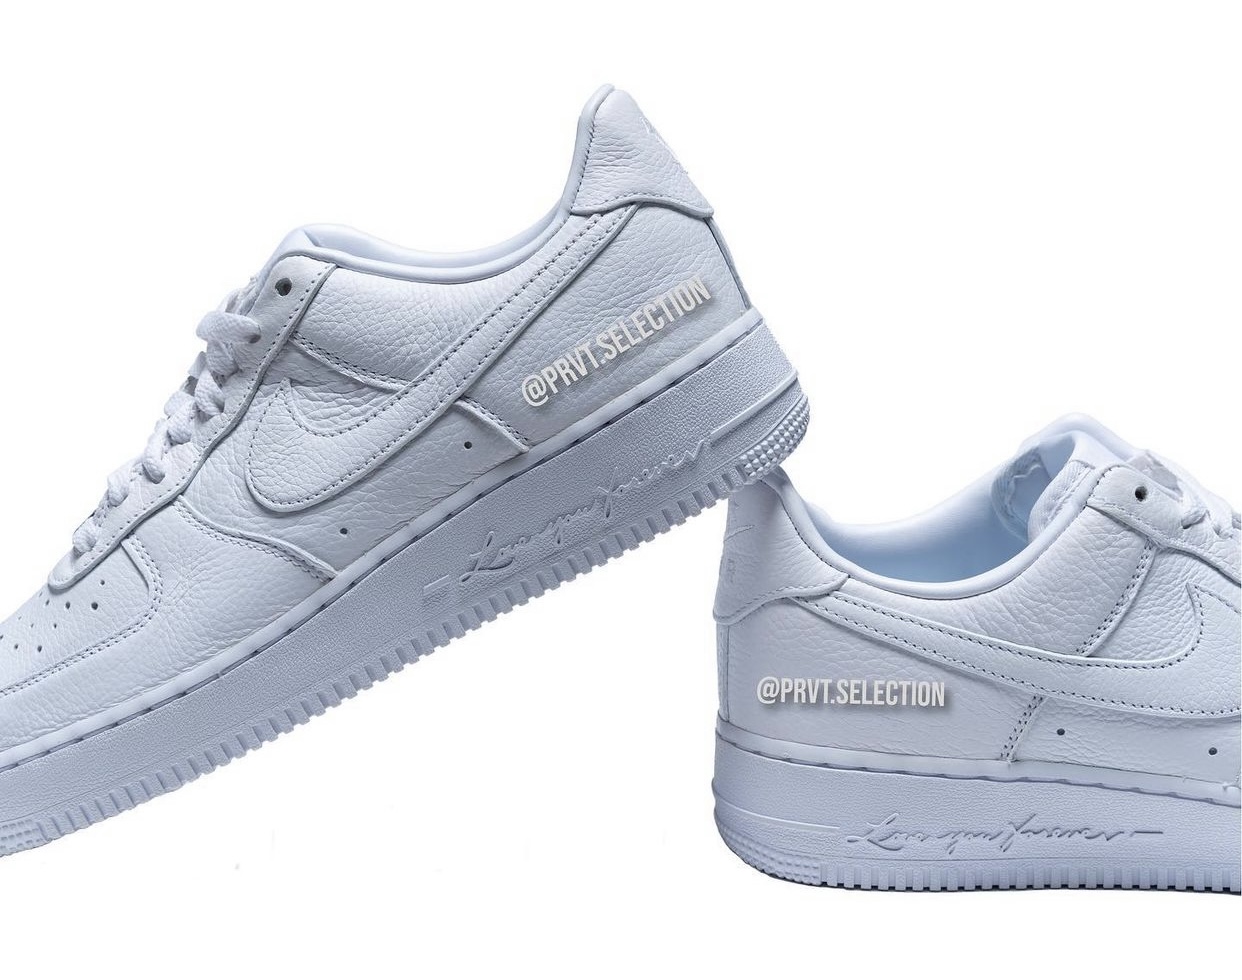 Drake NOCTA Nike Air Force 1 Certified Lover Boy CZ8065 100 Release Date 2